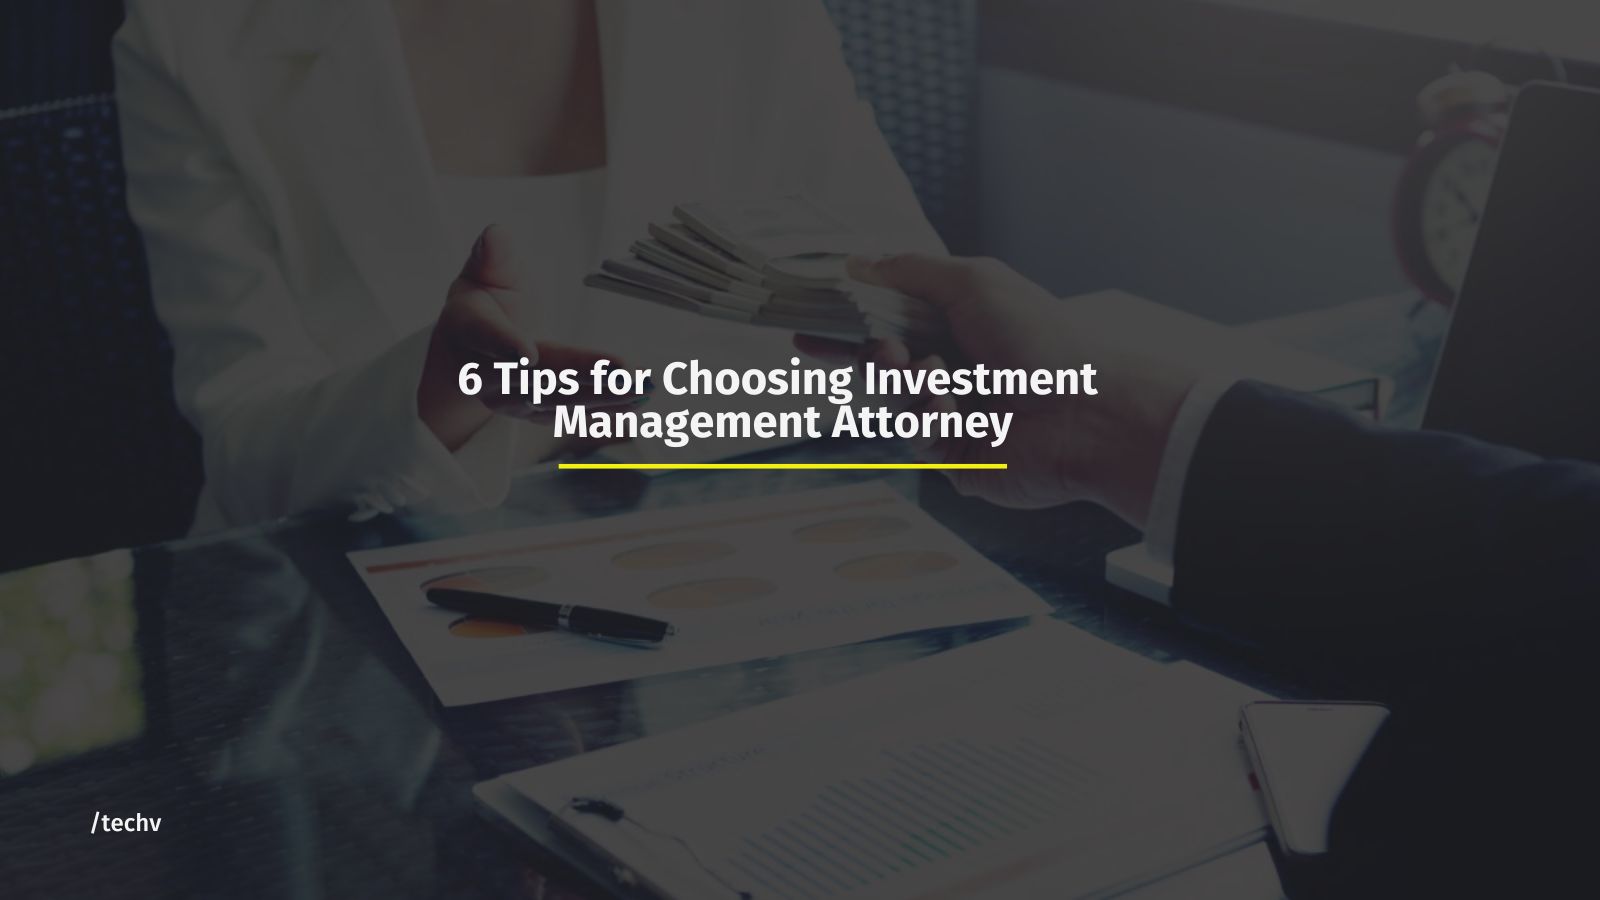 6 Tips for Choosing Investment Management Attorney